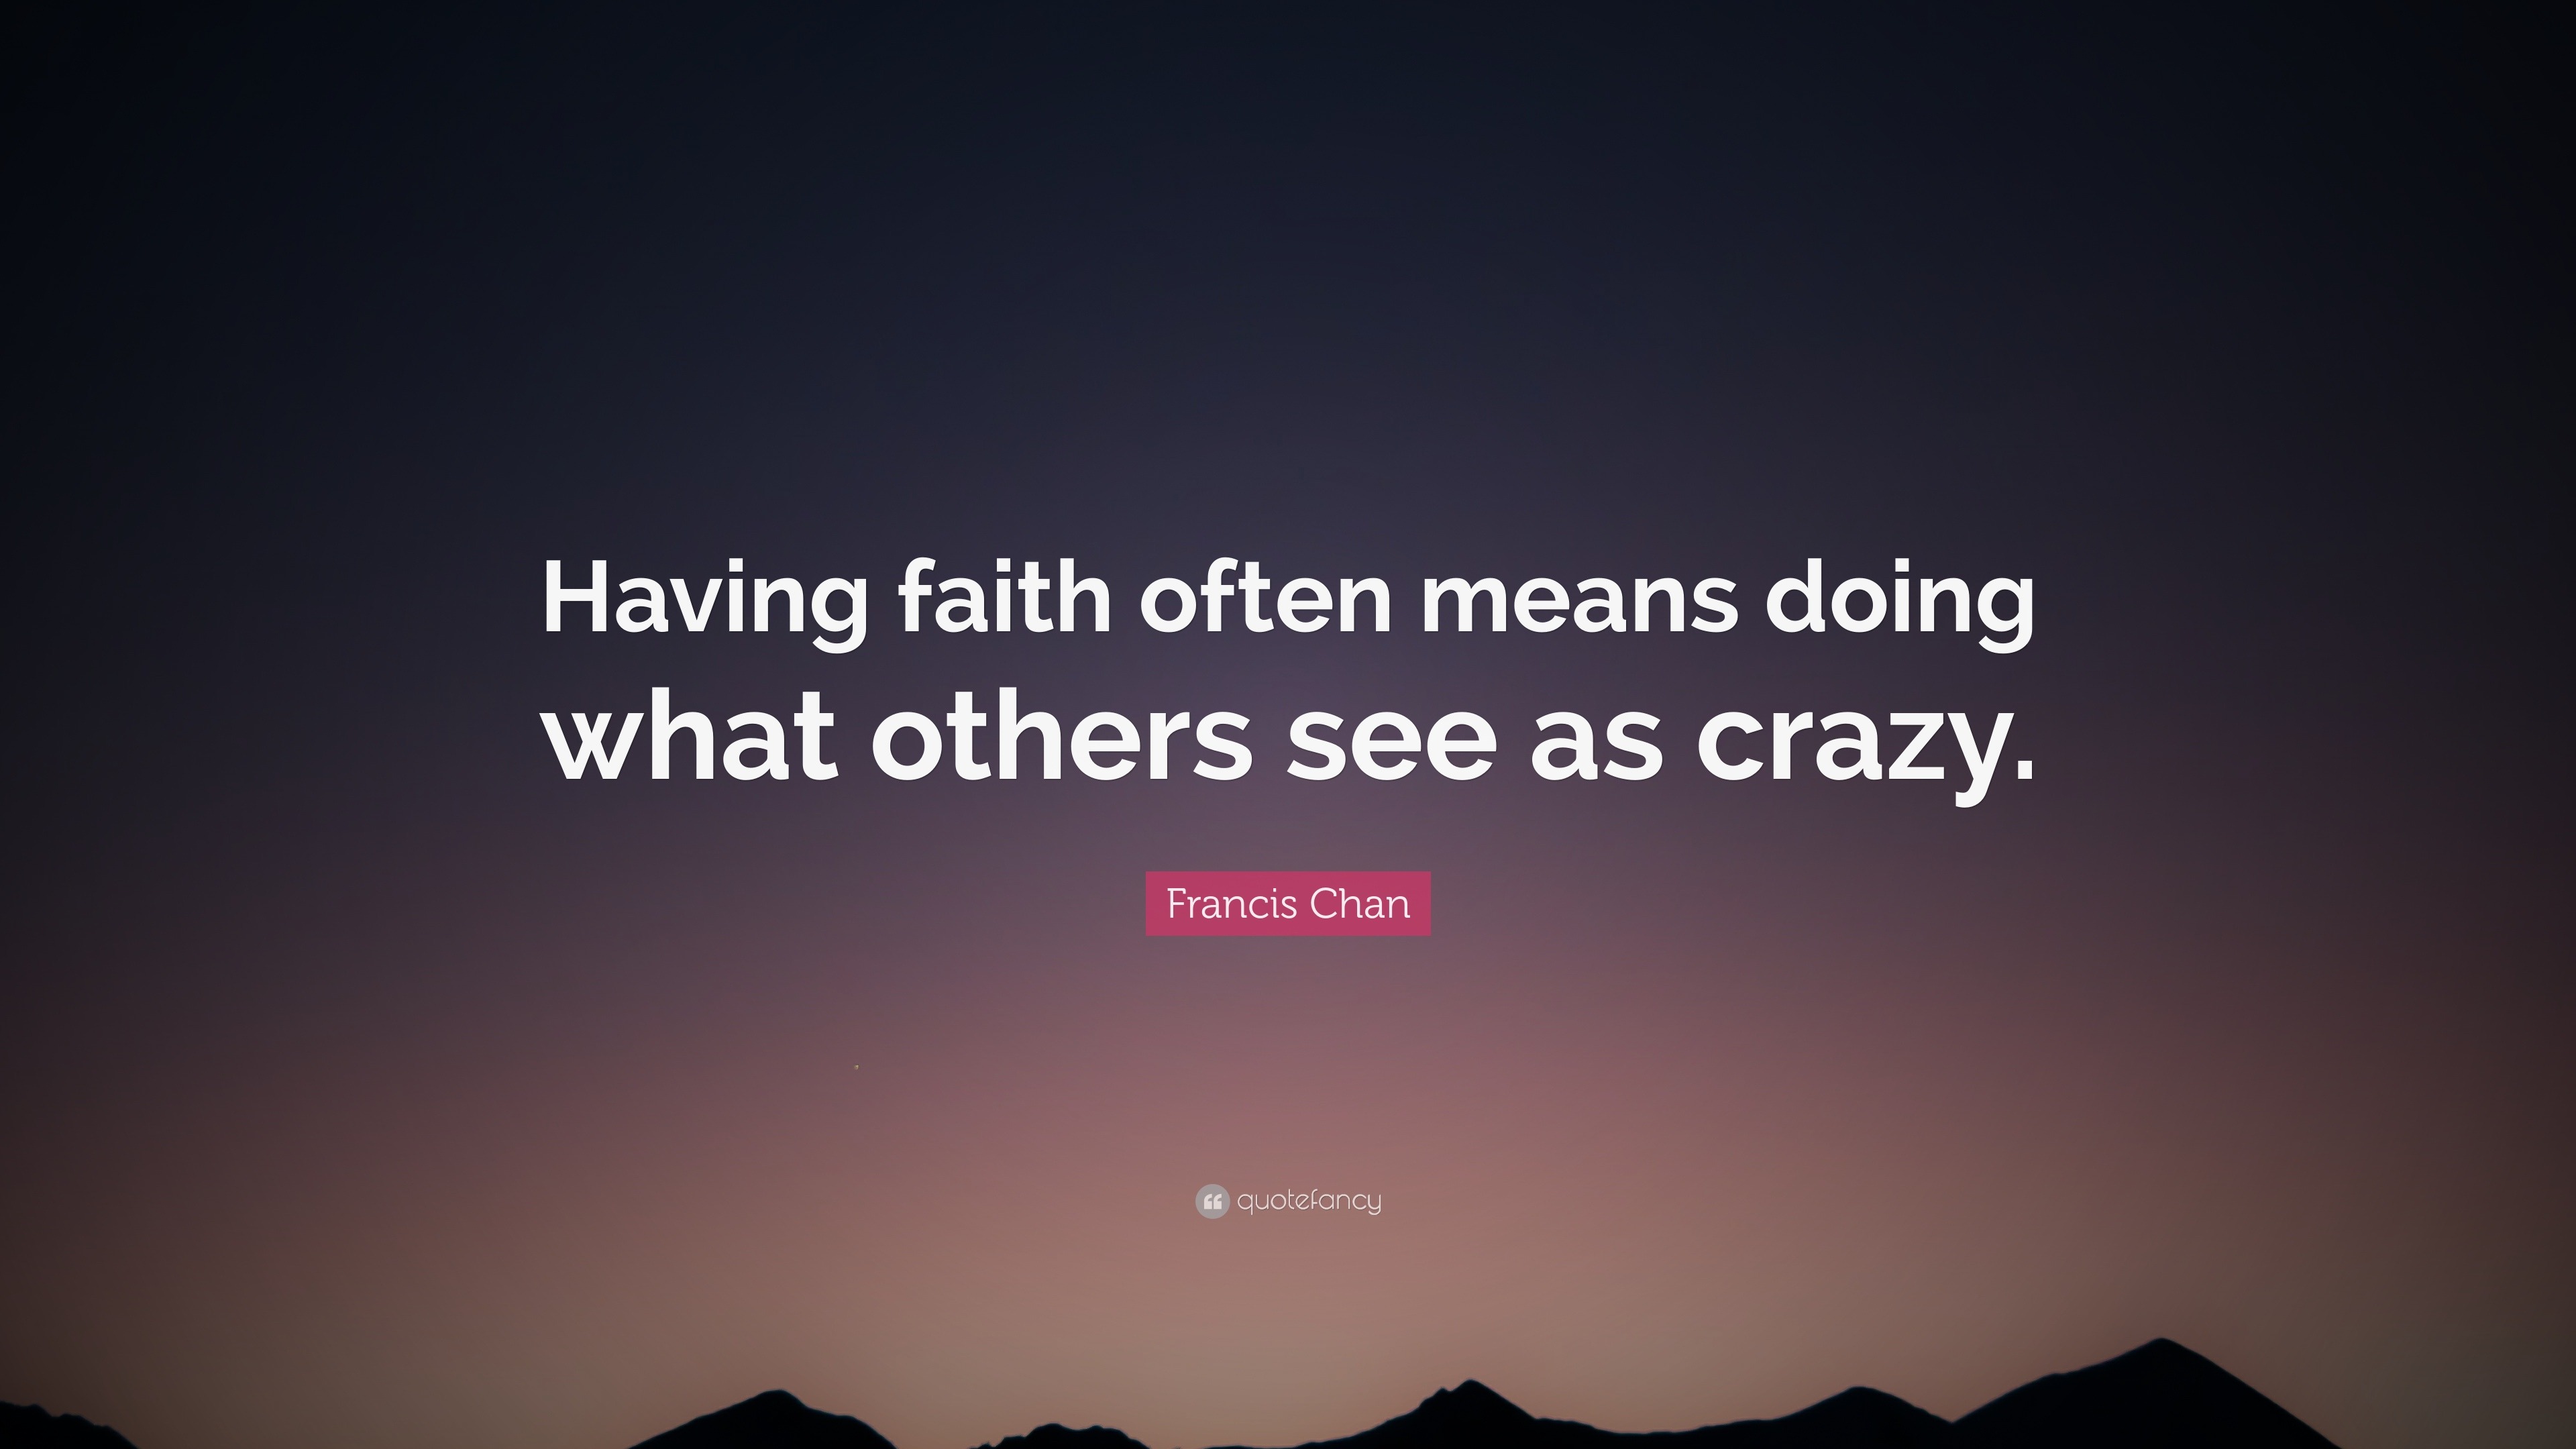 Francis Chan Quote “Having faith often means doing what others see as